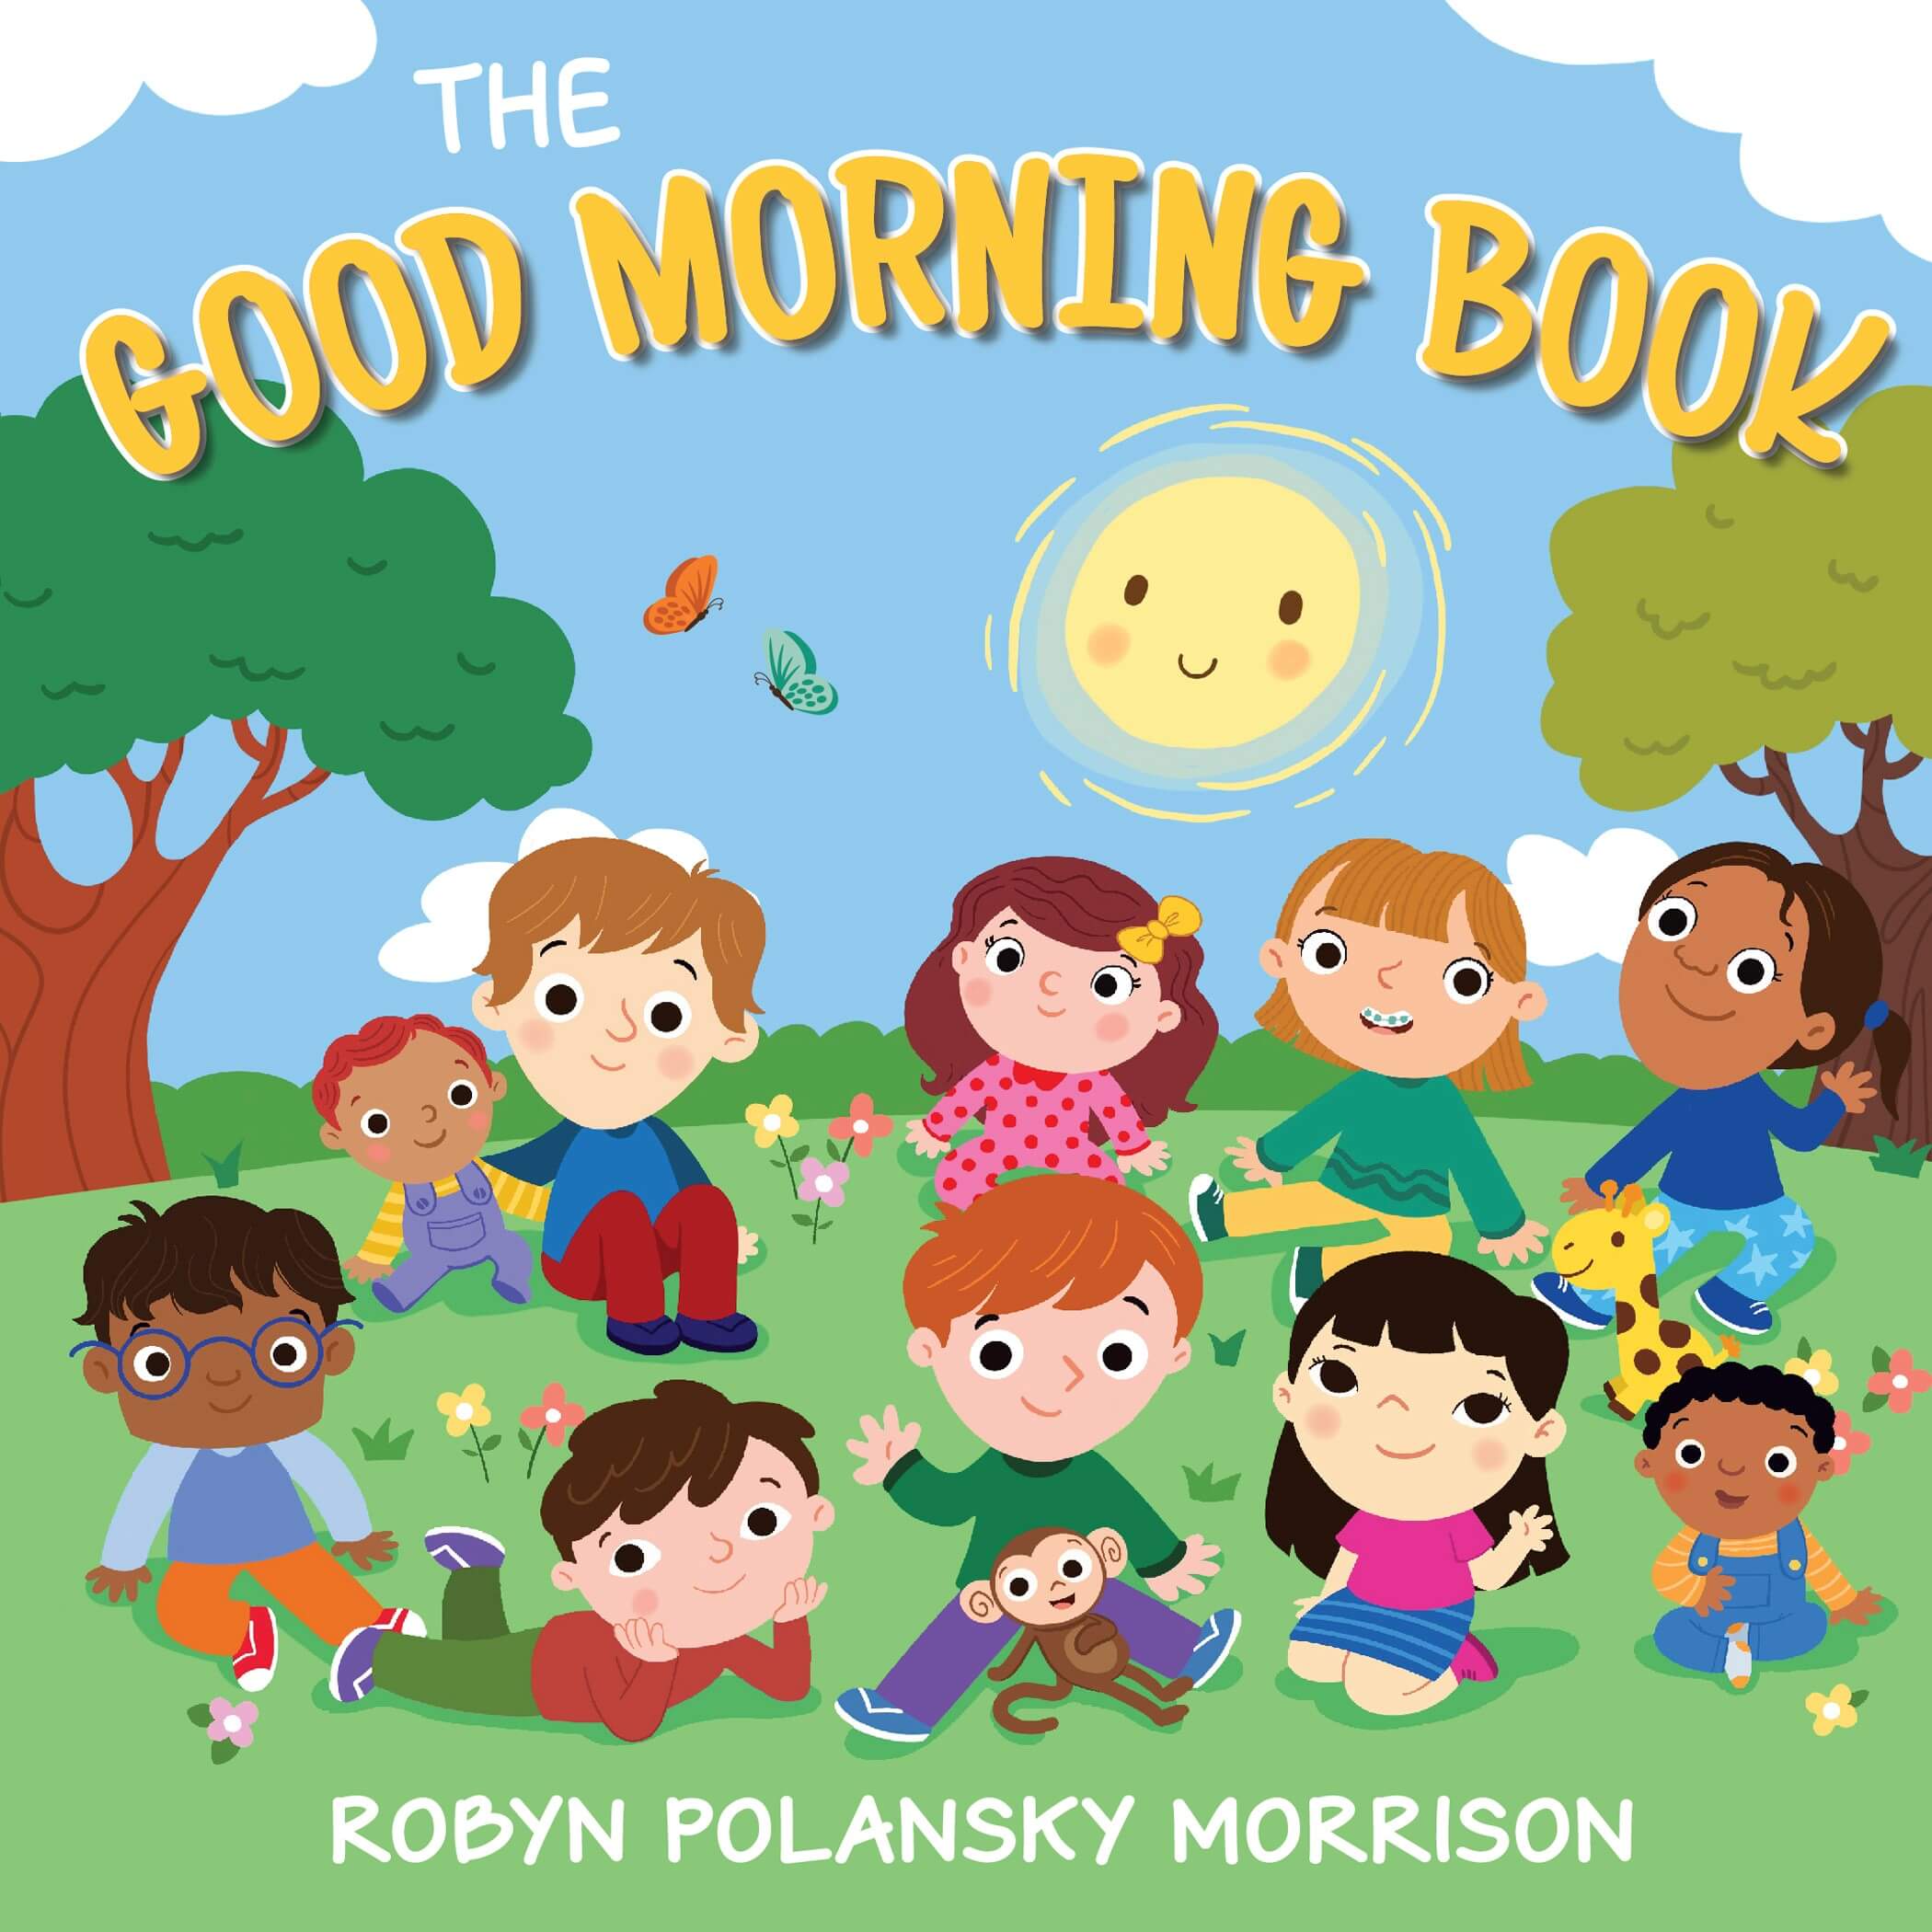 The Good Morning Book Book Image